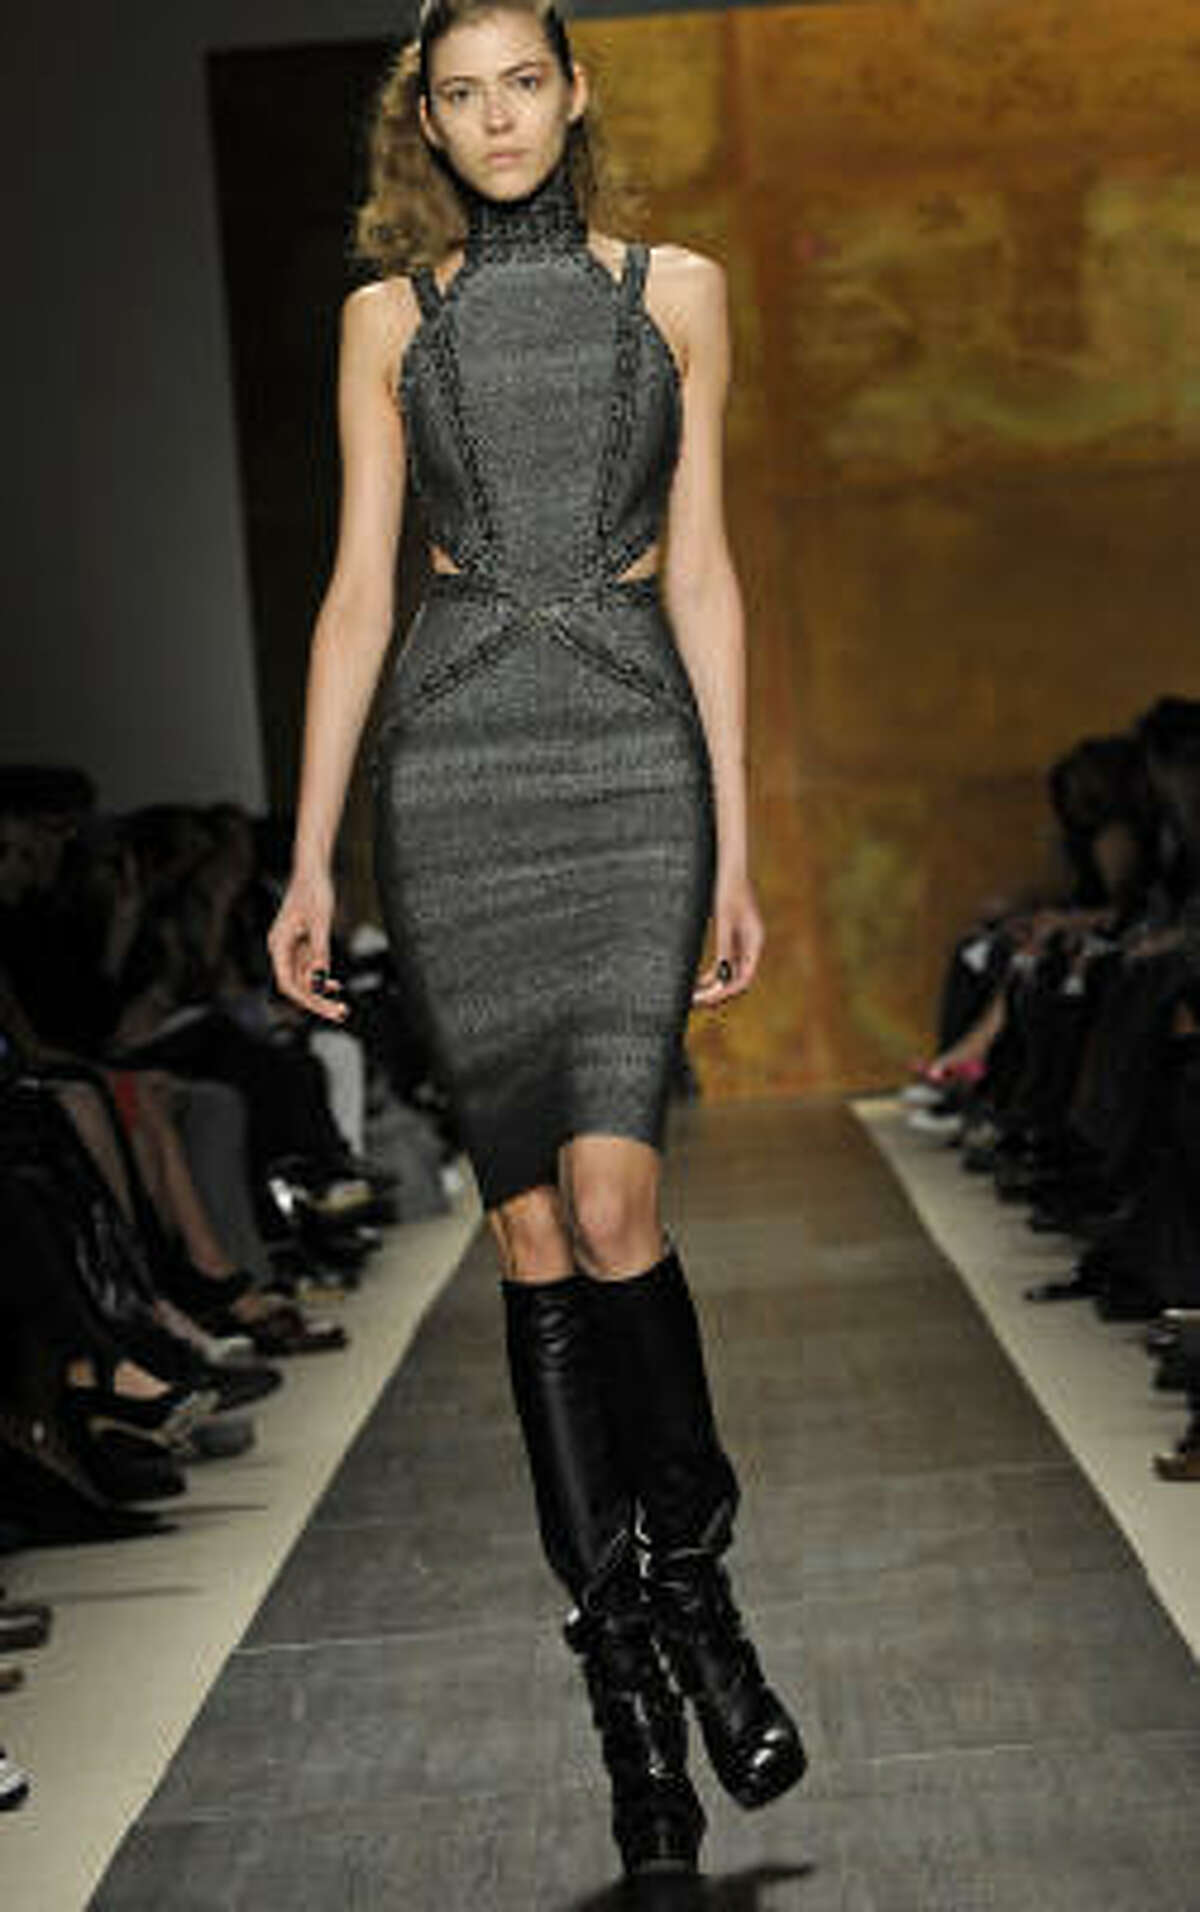 The fall 2009 collection of Herve Leger by Max Azria